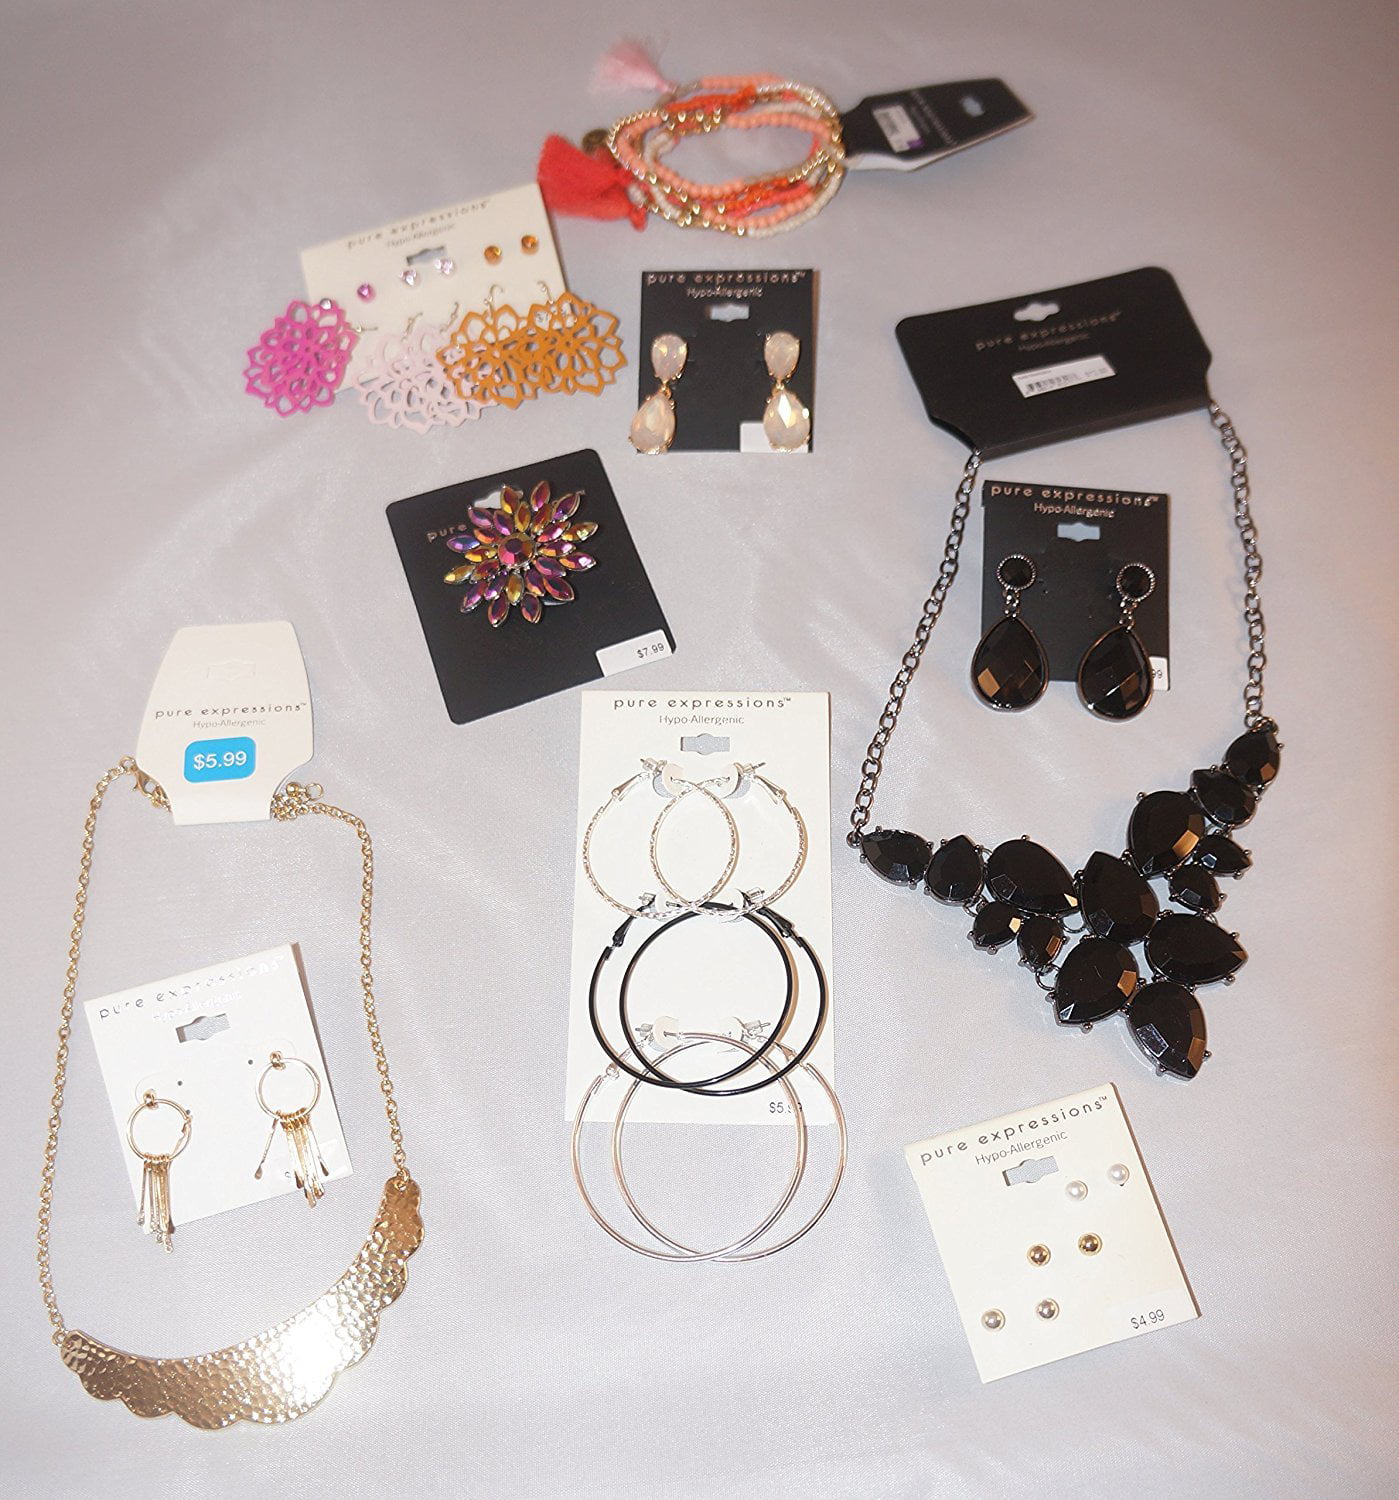 UNSEARCHED,UNTESTED Lot of Costume Jewelry 2-3+LBS Grab Bags WEAR,SELL,CRAFT 